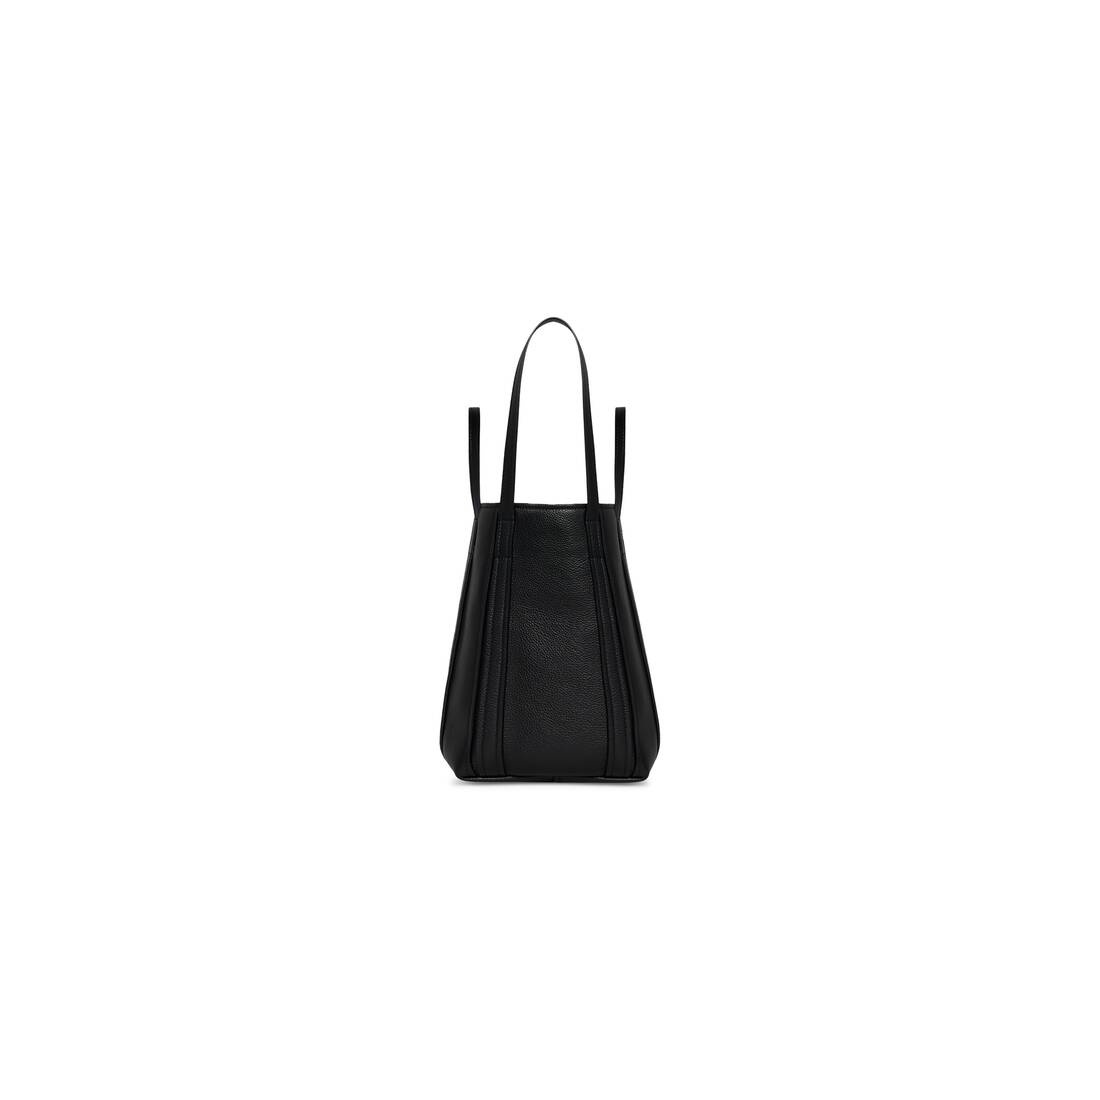 Women's Everyday Small North-south Shoulder Tote Bag in Black - 3